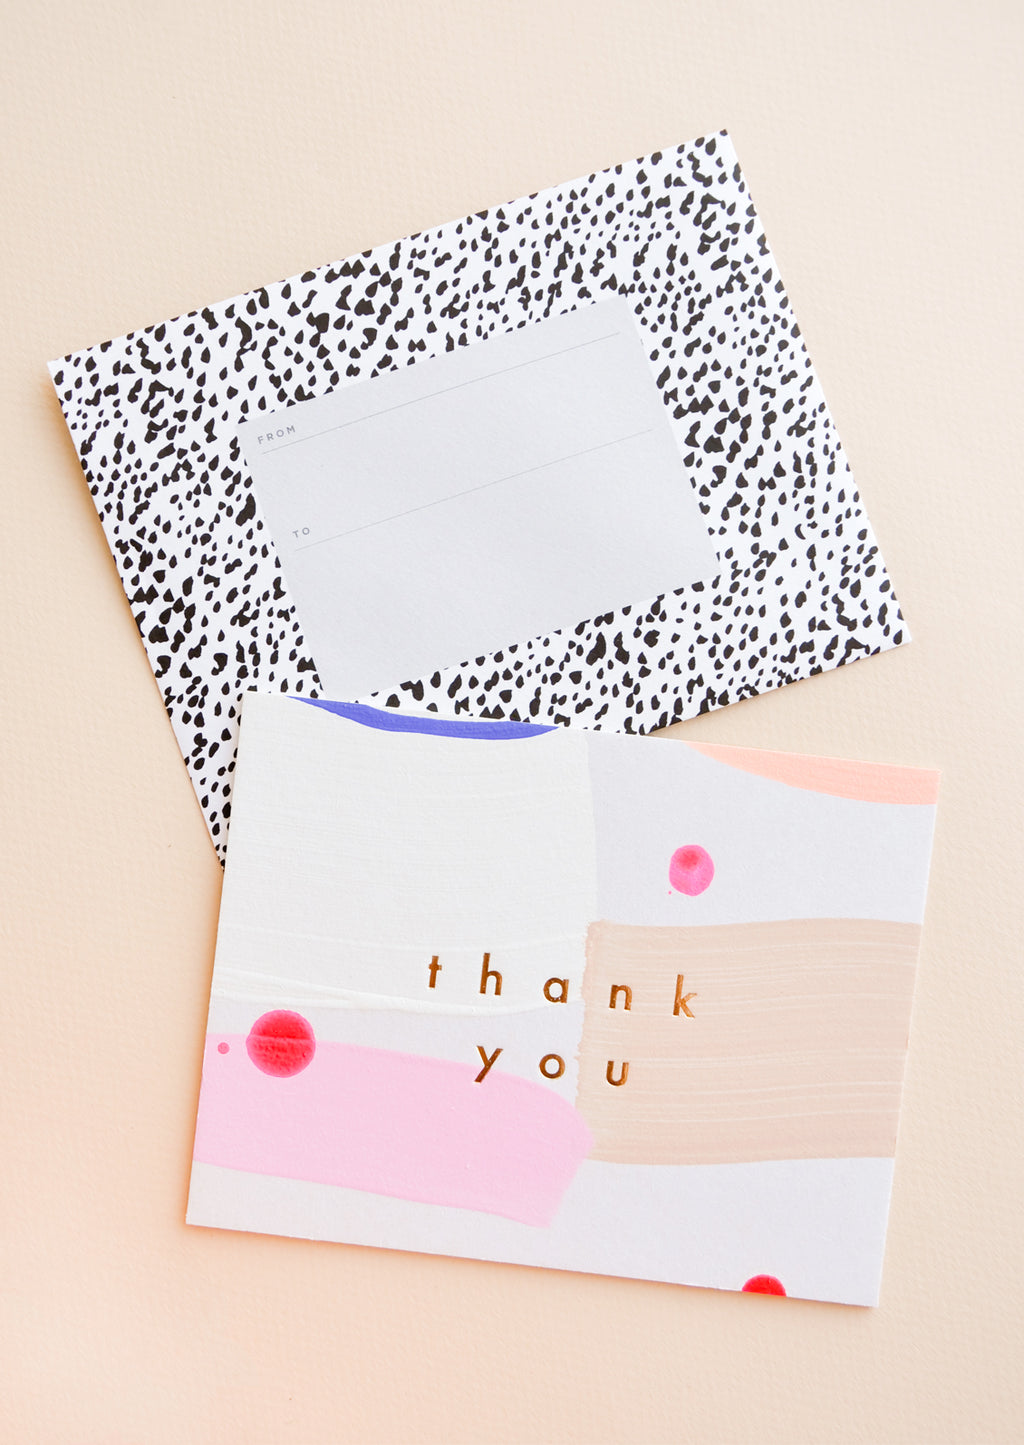 2: Hand painted card in colorful abstract pattern with gold foil "Thank you" text, paired with black and white printed envelope